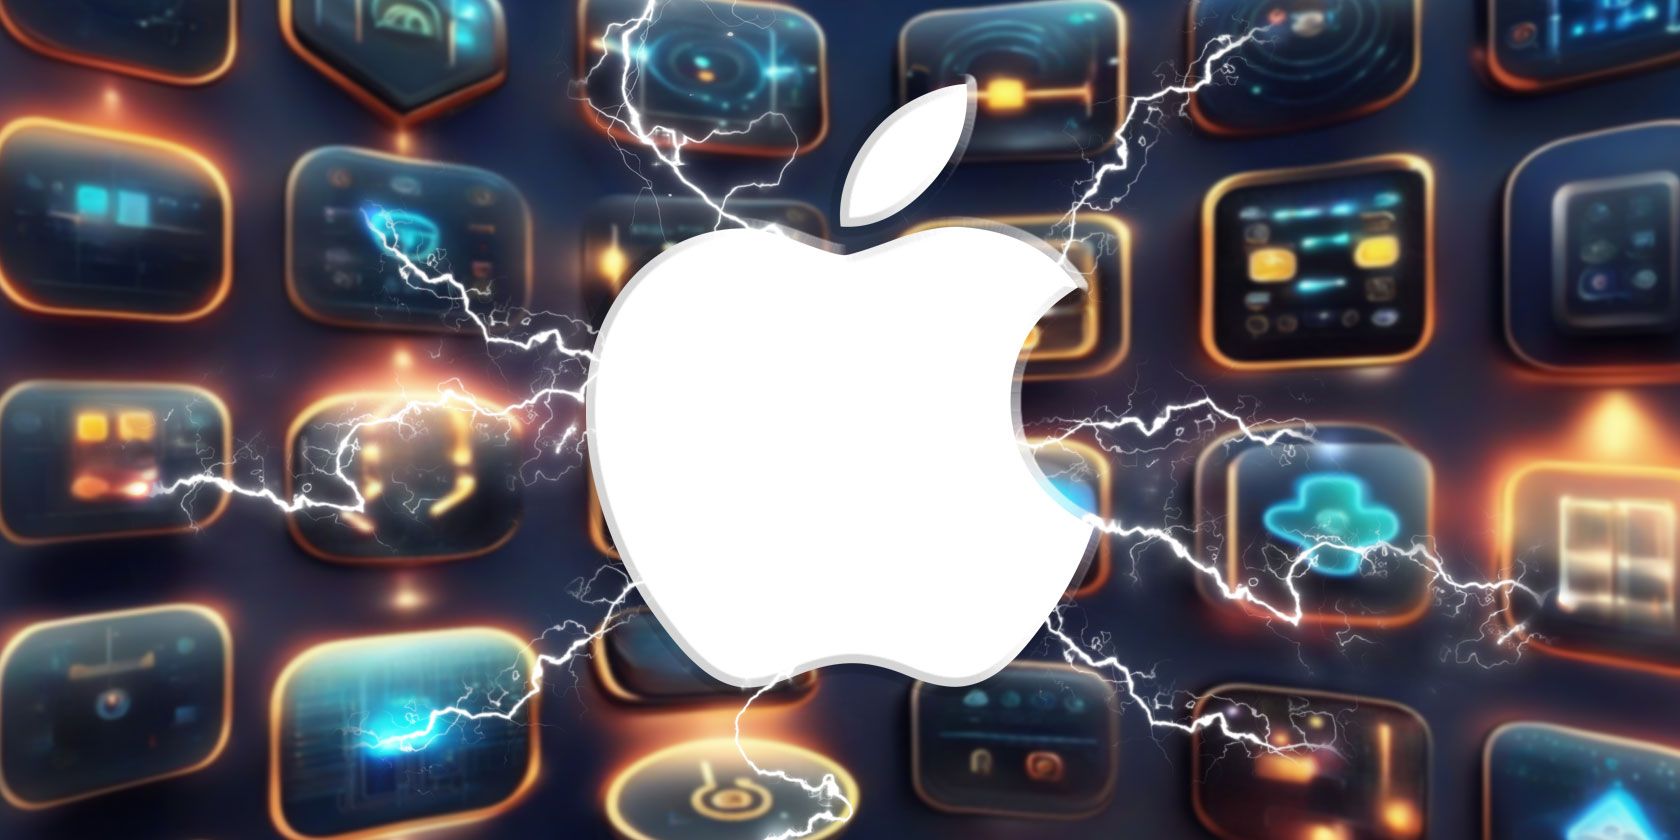 Apple logo getting charged by apps